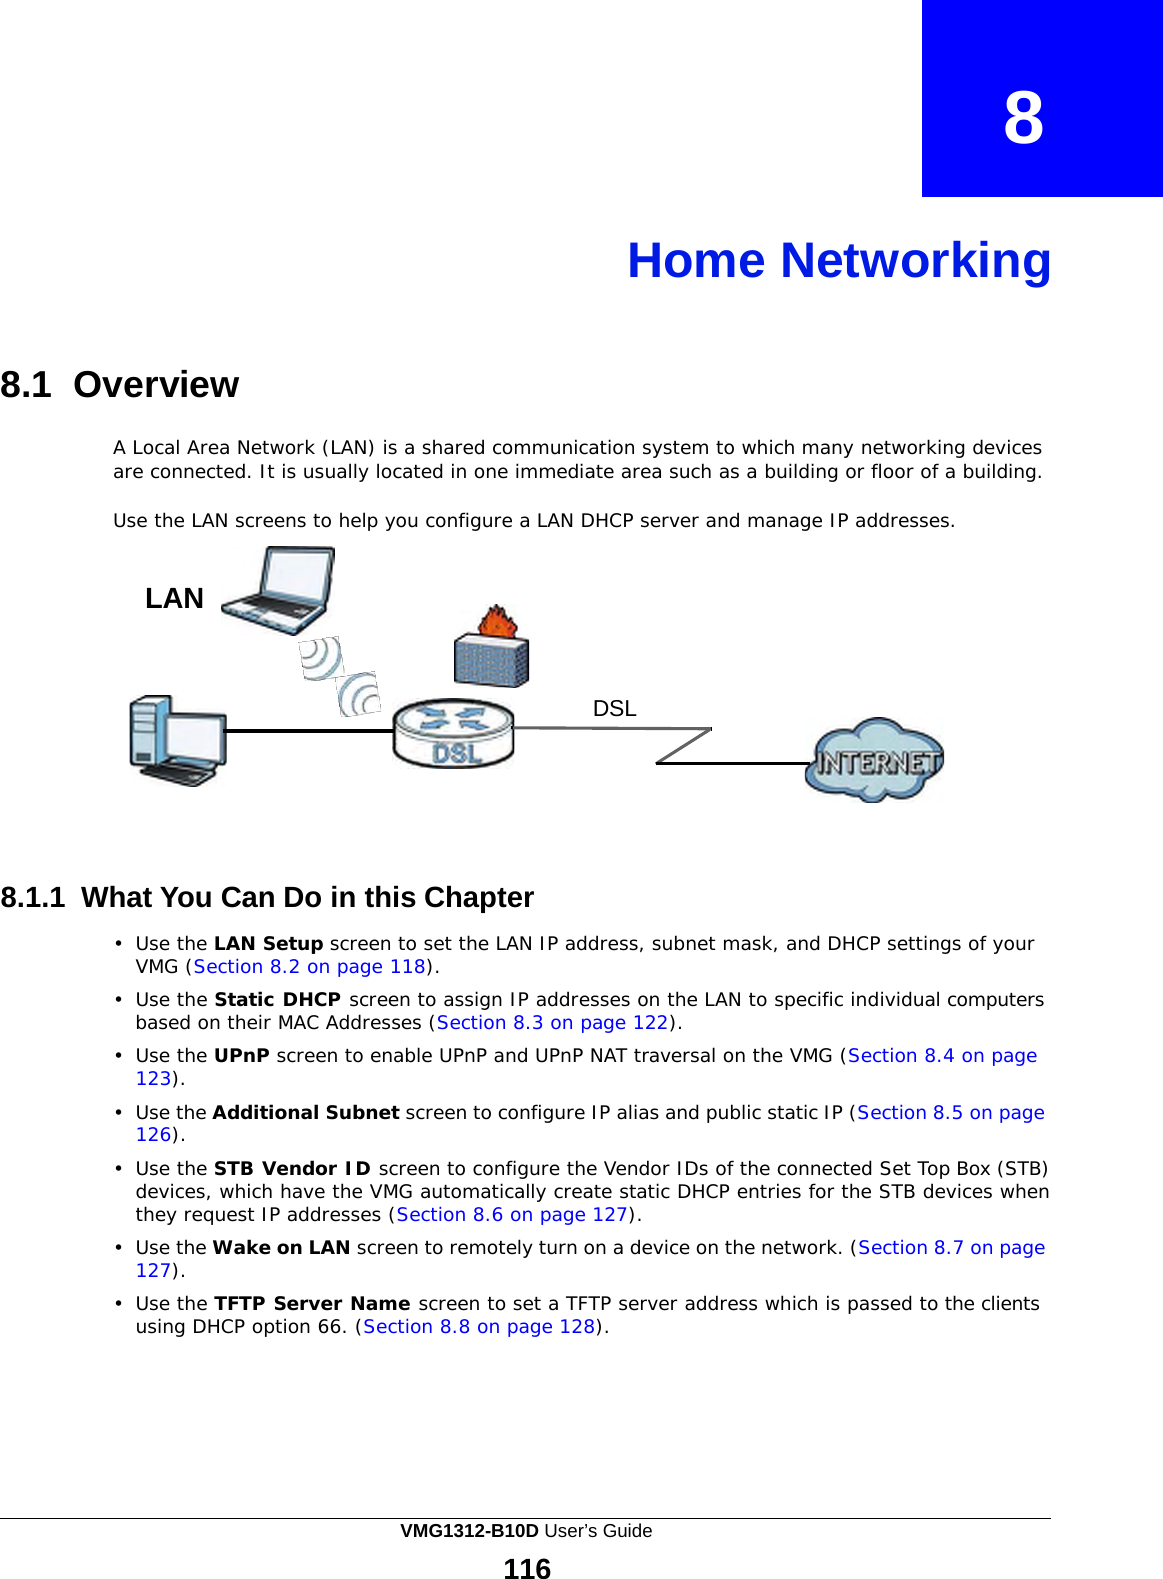              8    Home Networking     8.1  Overview  A Local Area Network (LAN) is a shared communication system to which many networking devices are connected. It is usually located in one immediate area such as a building or floor of a building.  Use the LAN screens to help you configure a LAN DHCP server and manage IP addresses.   LAN   DSL         8.1.1  What You Can Do in this Chapter  •  Use the LAN Setup screen to set the LAN IP address, subnet mask, and DHCP settings of your VMG (Section 8.2 on page 118).  •  Use the Static DHCP screen to assign IP addresses on the LAN to specific individual computers based on their MAC Addresses (Section 8.3 on page 122). •  Use the UPnP screen to enable UPnP and UPnP NAT traversal on the VMG (Section 8.4 on page 123).  •  Use the Additional Subnet screen to configure IP alias and public static IP (Section 8.5 on page 126).  •  Use the STB Vendor ID screen to configure the Vendor IDs of the connected Set Top Box (STB) devices, which have the VMG automatically create static DHCP entries for the STB devices when they request IP addresses (Section 8.6 on page 127).  •  Use the Wake on LAN screen to remotely turn on a device on the network. (Section 8.7 on page 127).  •  Use the TFTP Server Name screen to set a TFTP server address which is passed to the clients using DHCP option 66. (Section 8.8 on page 128). VMG1312-B10D User’s Guide 116  